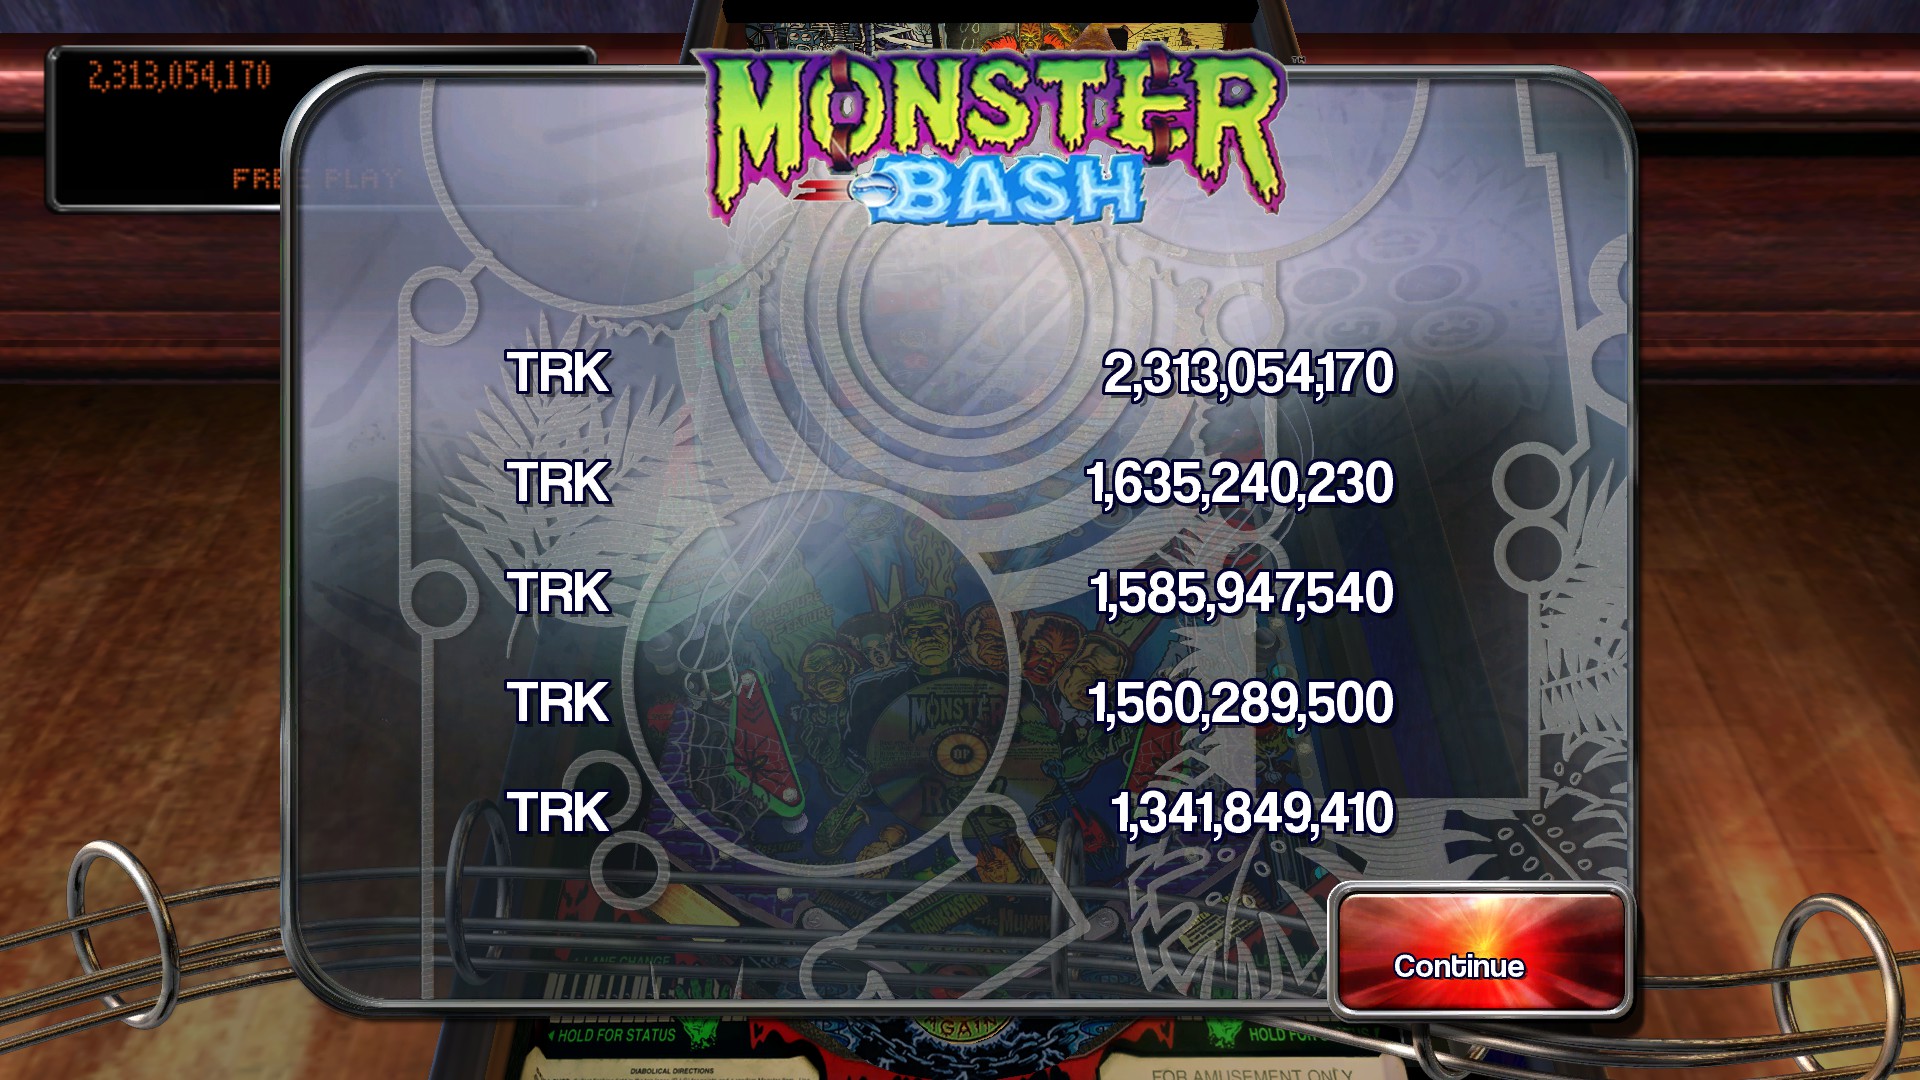 TheTrickster: Pinball Arcade: Monster Bash (PC) 2,313,054,170 points on 2016-06-09 04:55:07